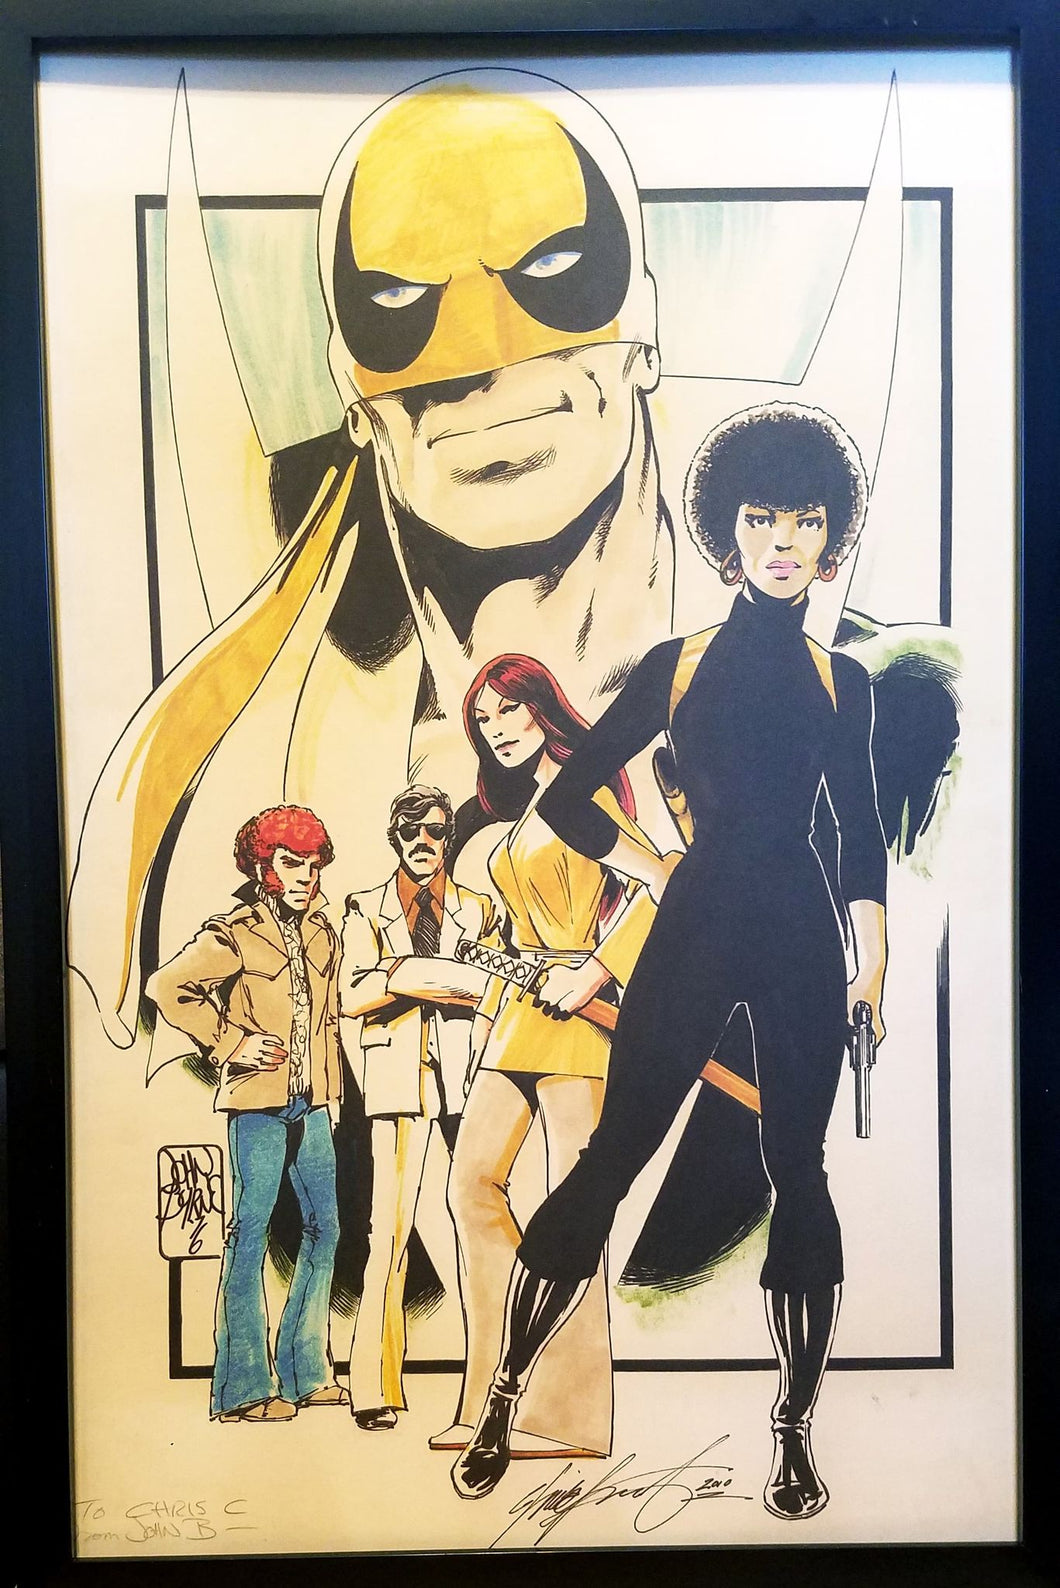 Iron Fist Daughters of the Dragon by John Byrne 11x17 FRAMED Original Art Poster Marvel Comics